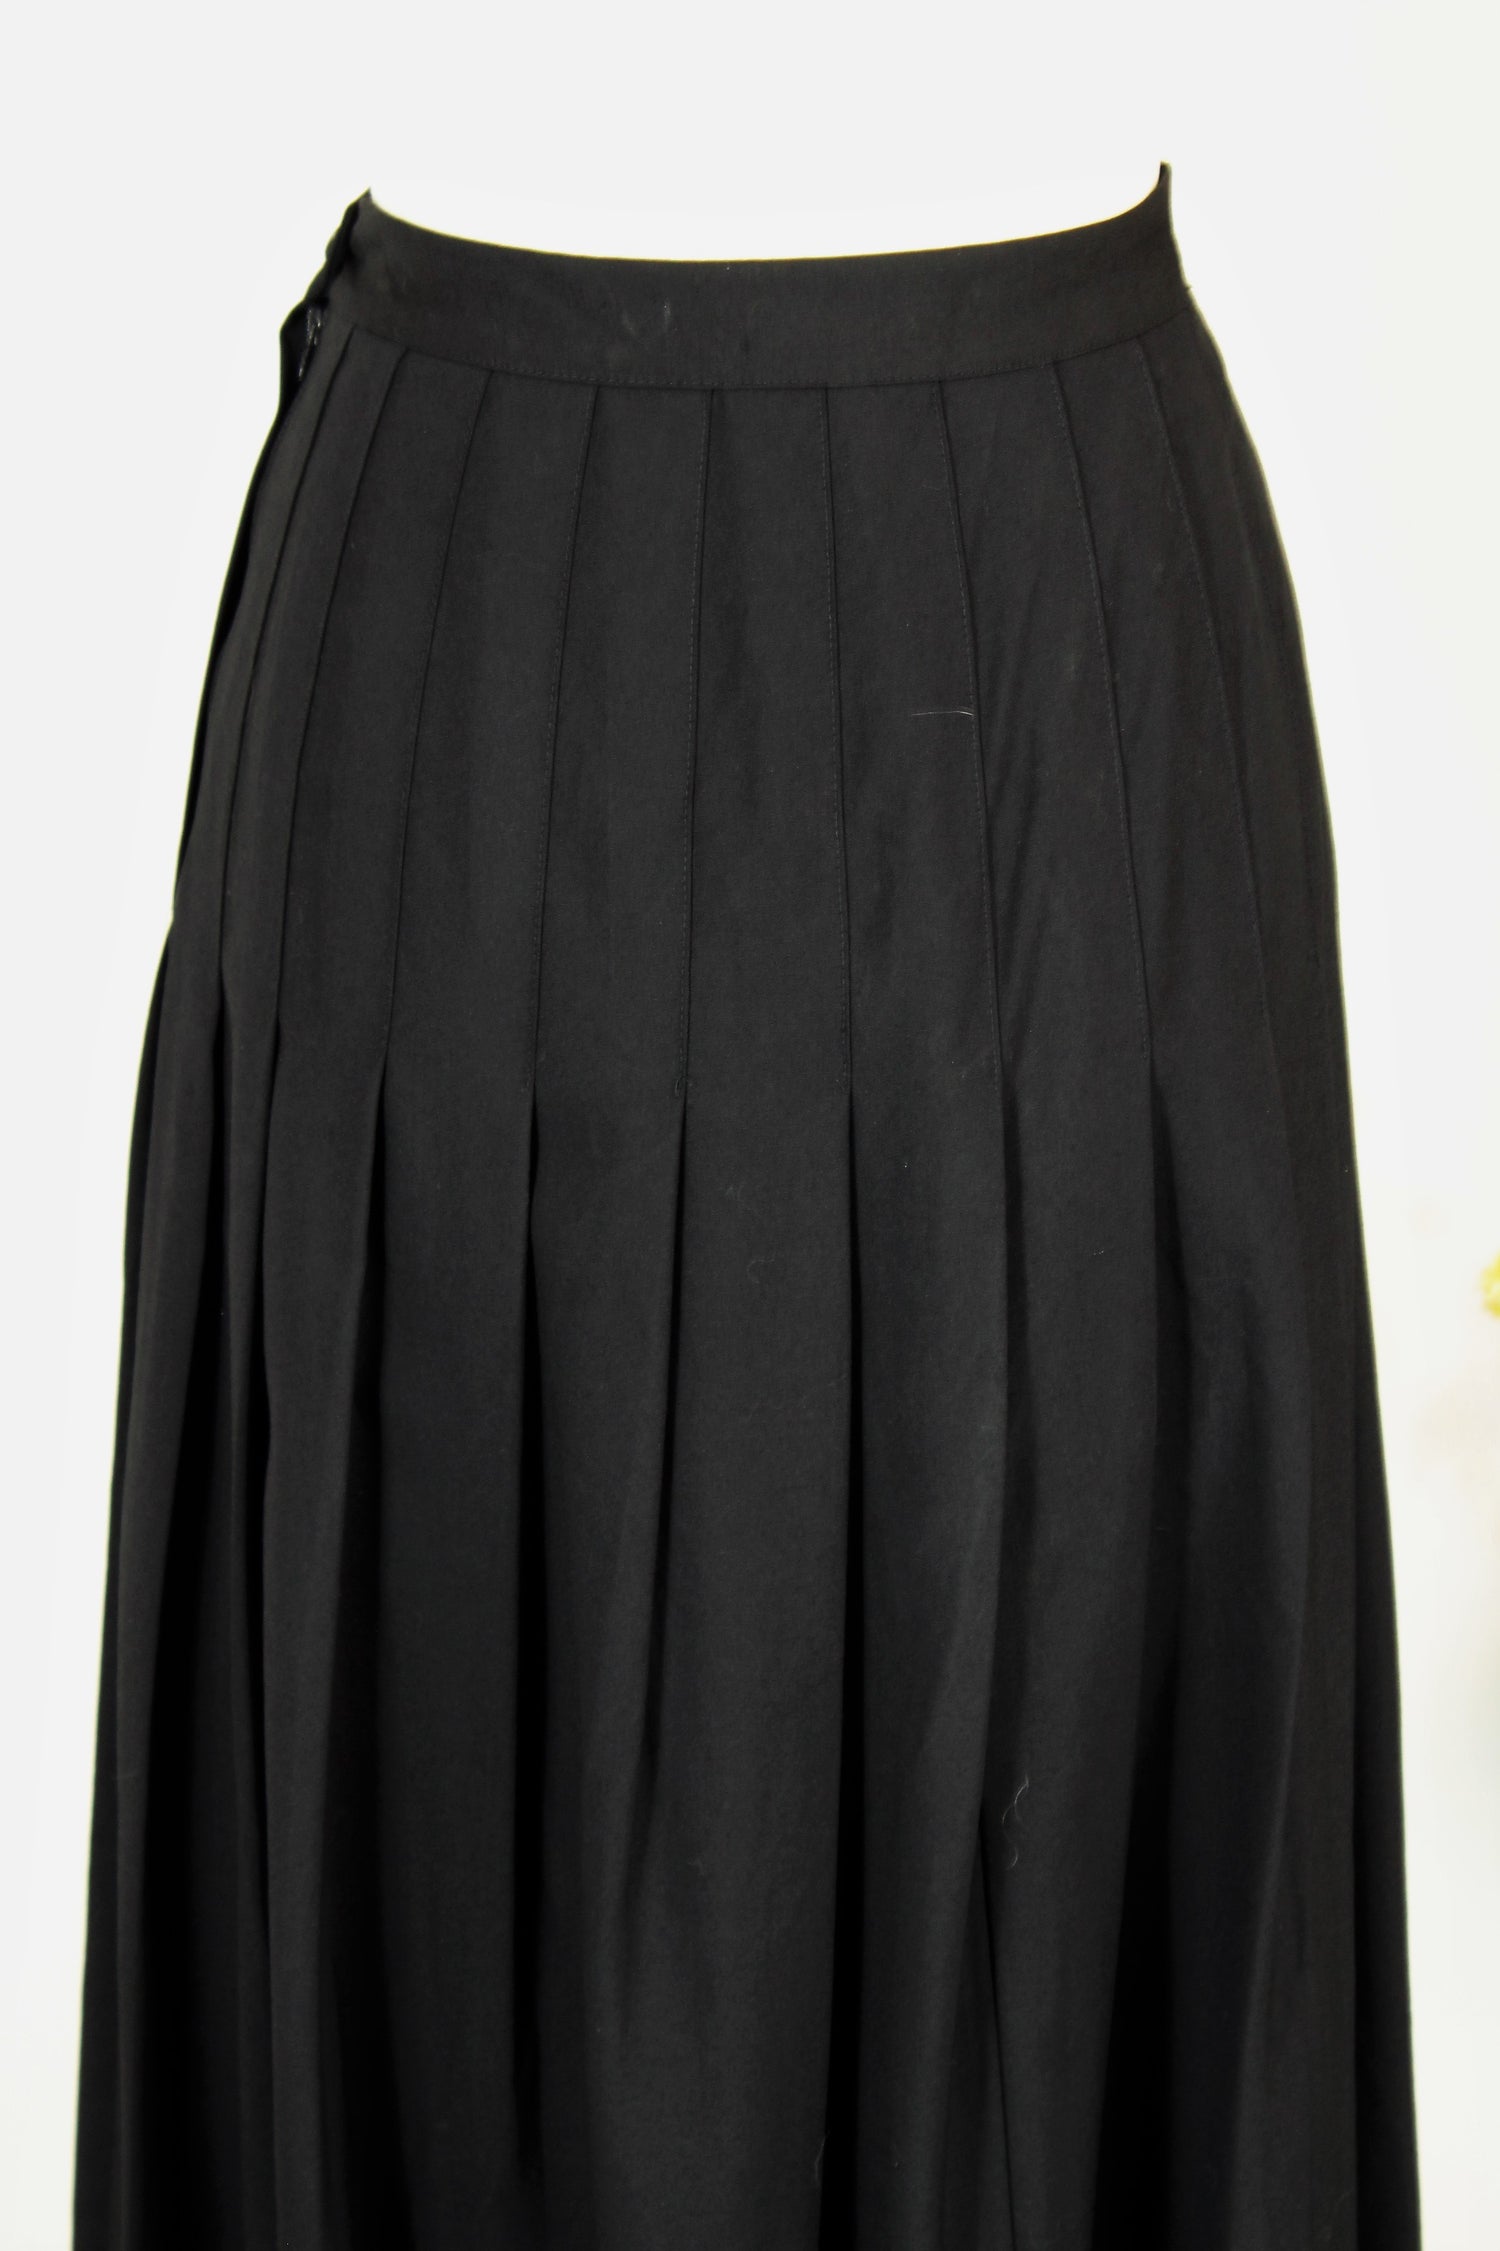 Vintage 1990s Black Pleated Maxi Skirt by Enrico Fratelli